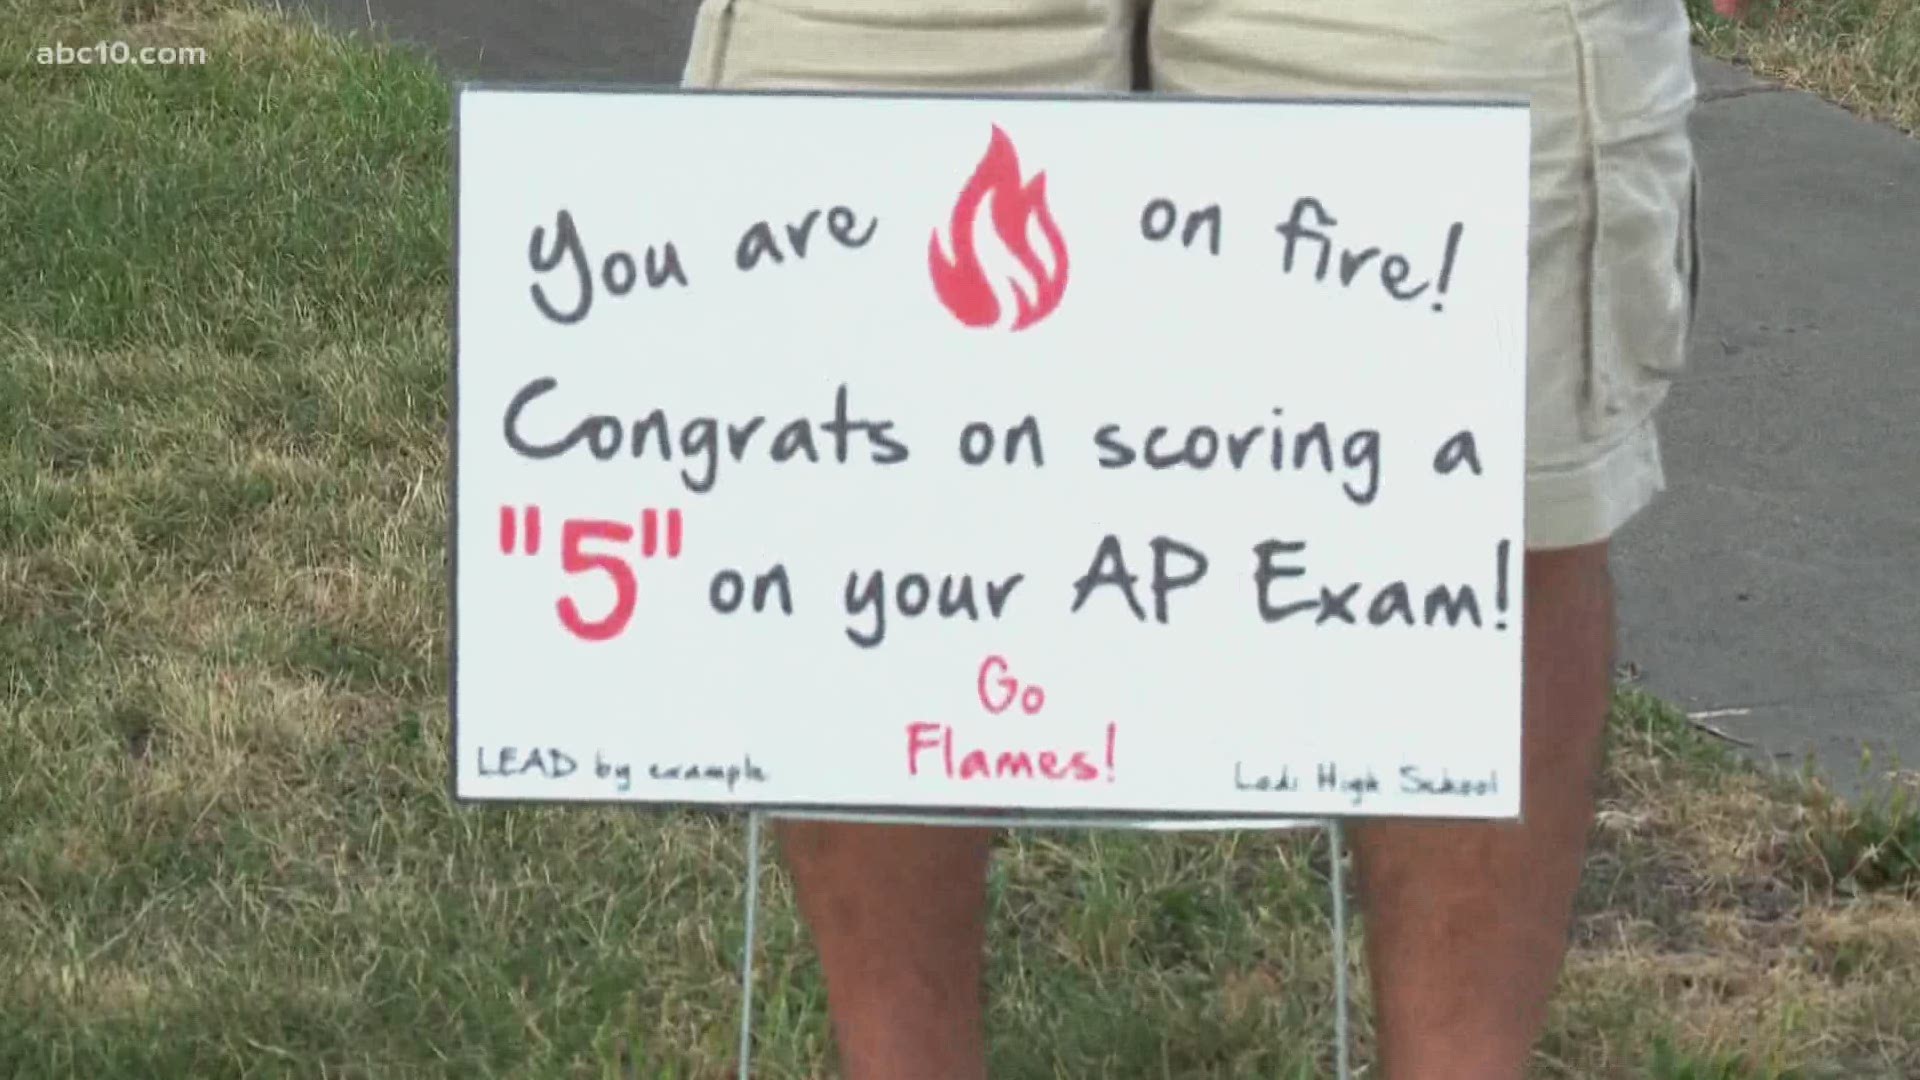 Lodi teachers delivered special lawn signs to students who scored a 5 on their AP exams.